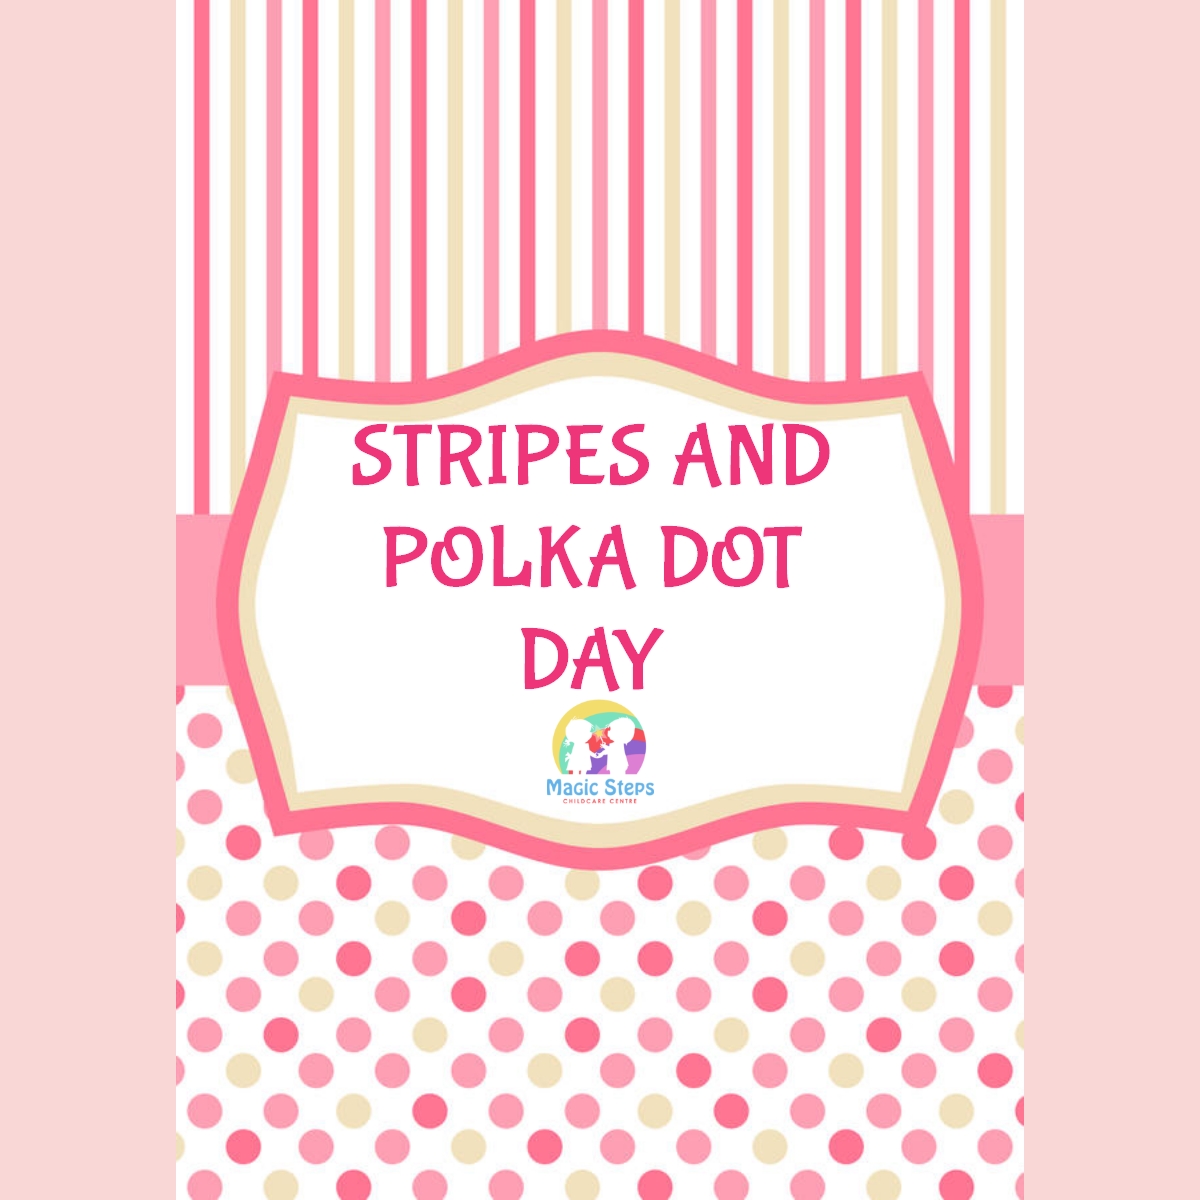 Stripes and Polka Dot Day- Wednesday 12th May